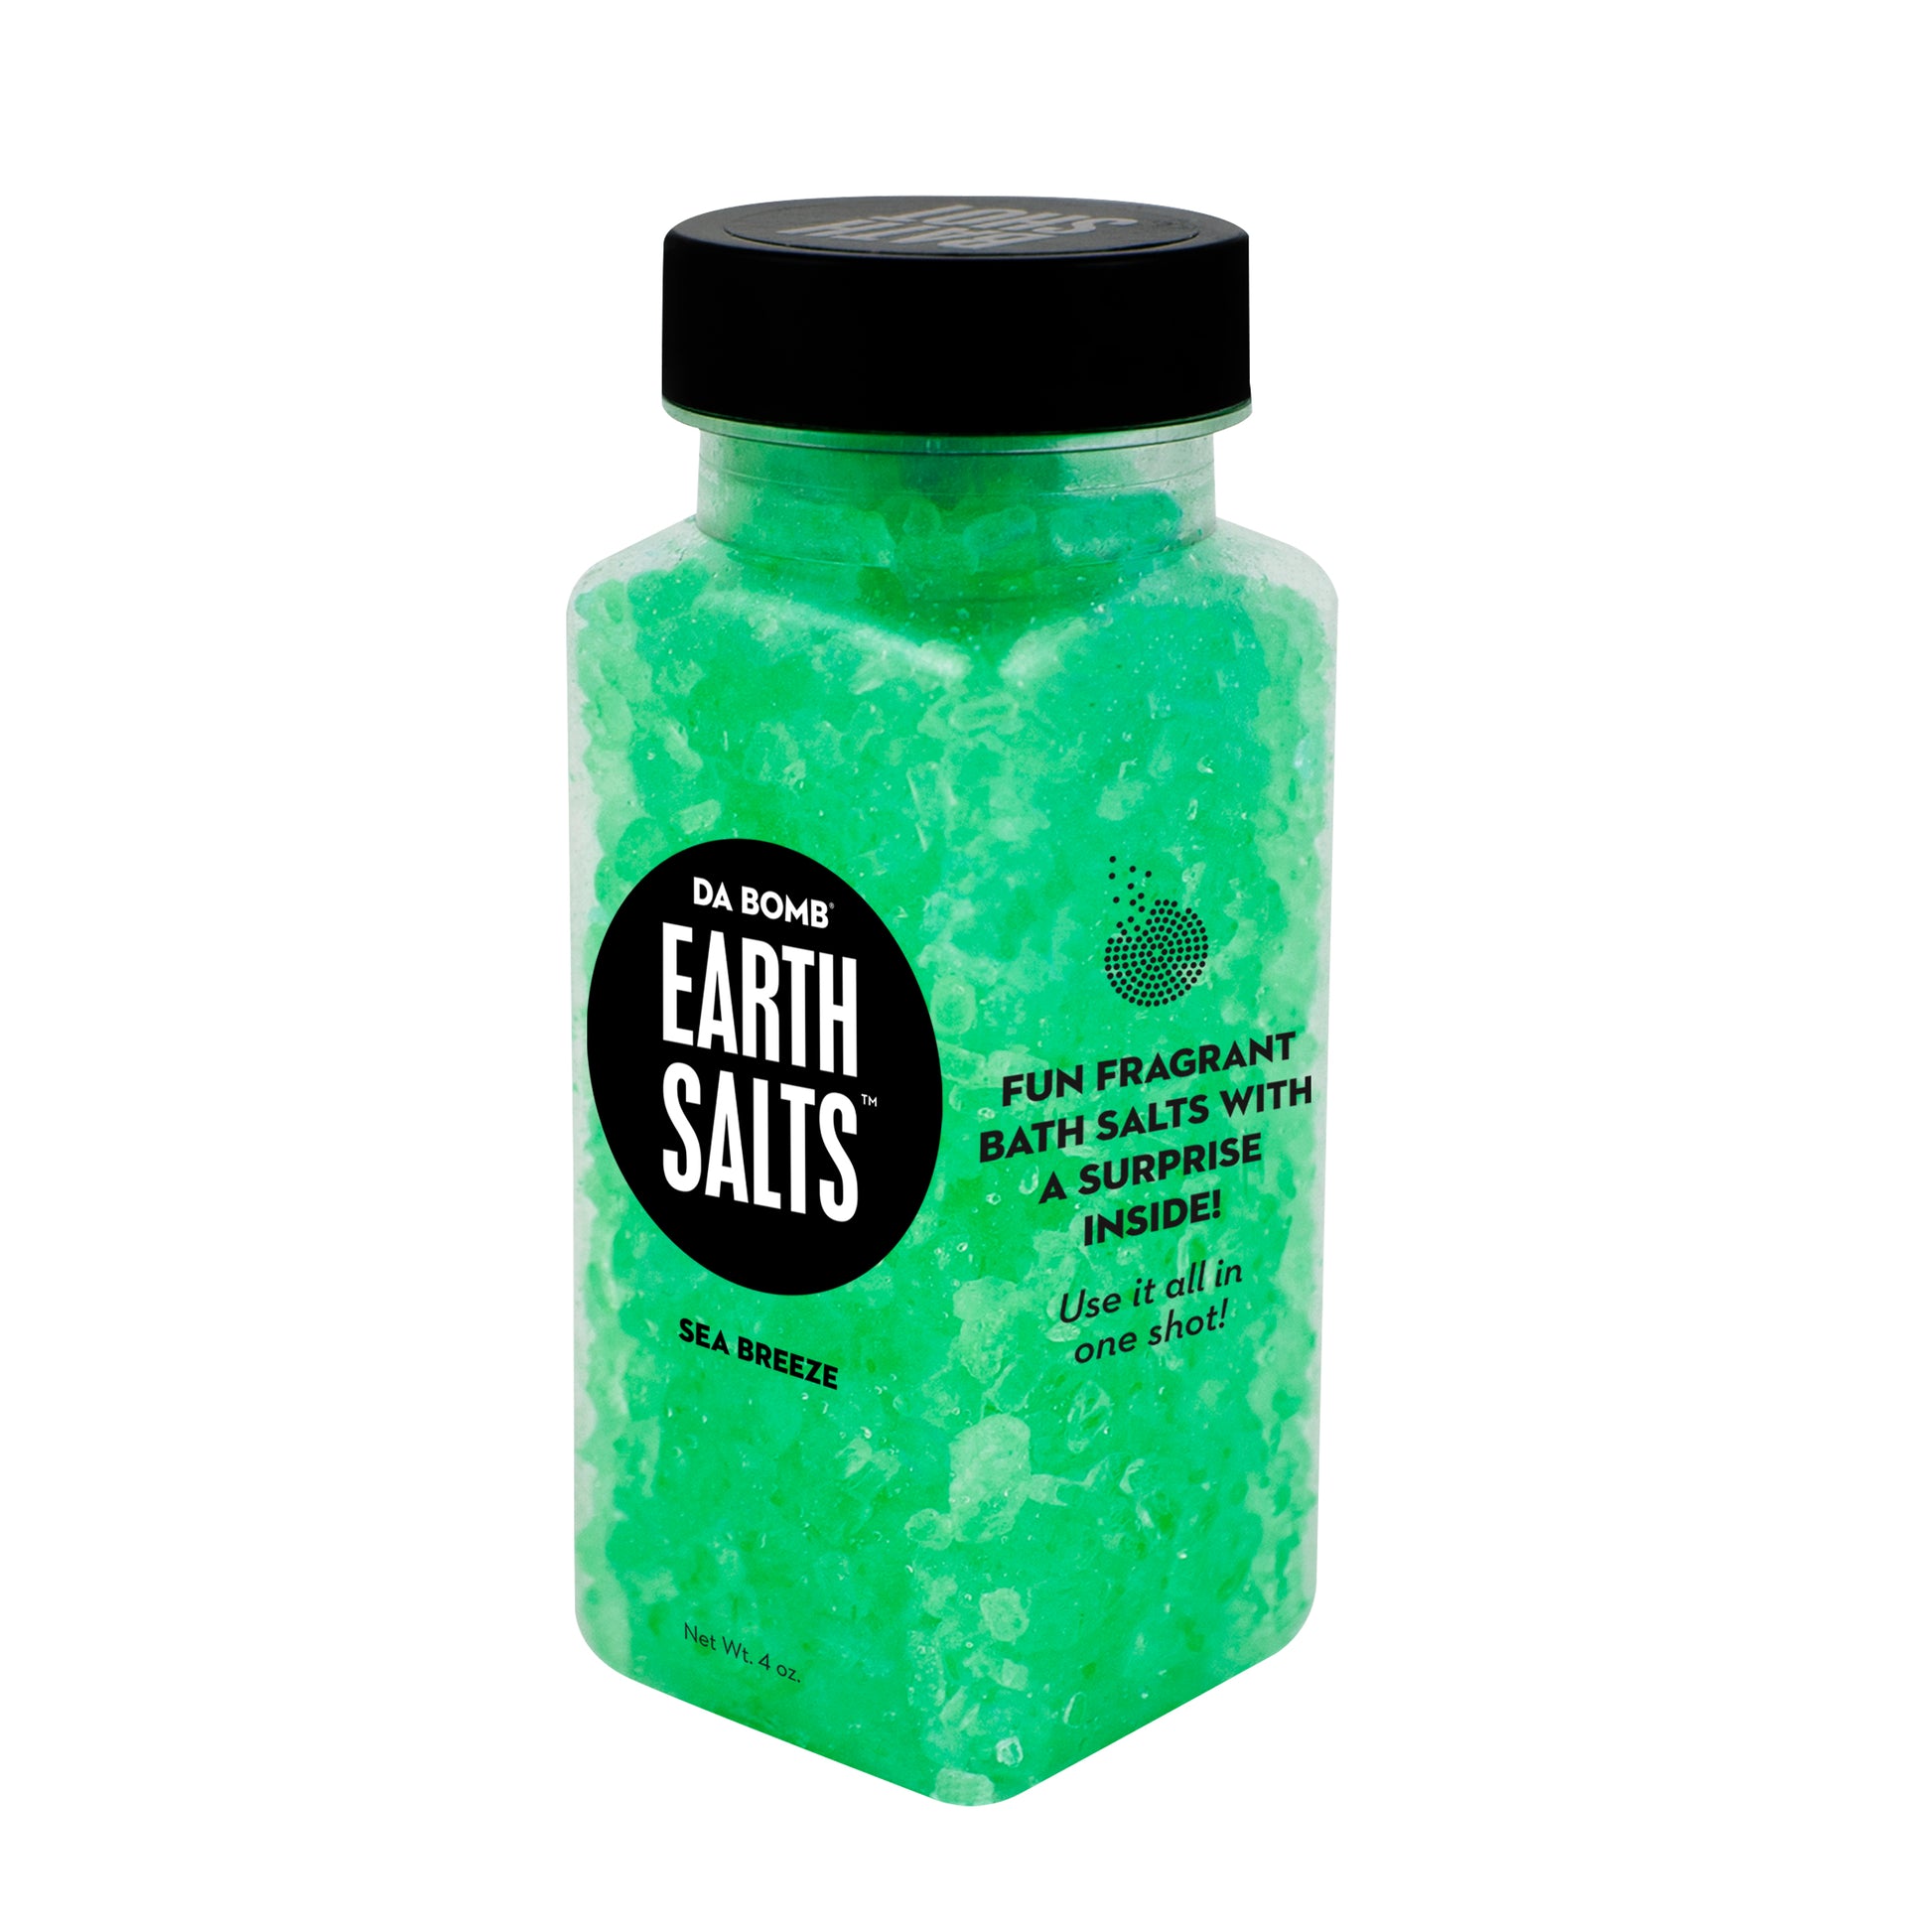 Small, clear plastic jar filled with green and orange bath salt that smells like sea breeze. Each shot contains a fun surprise.